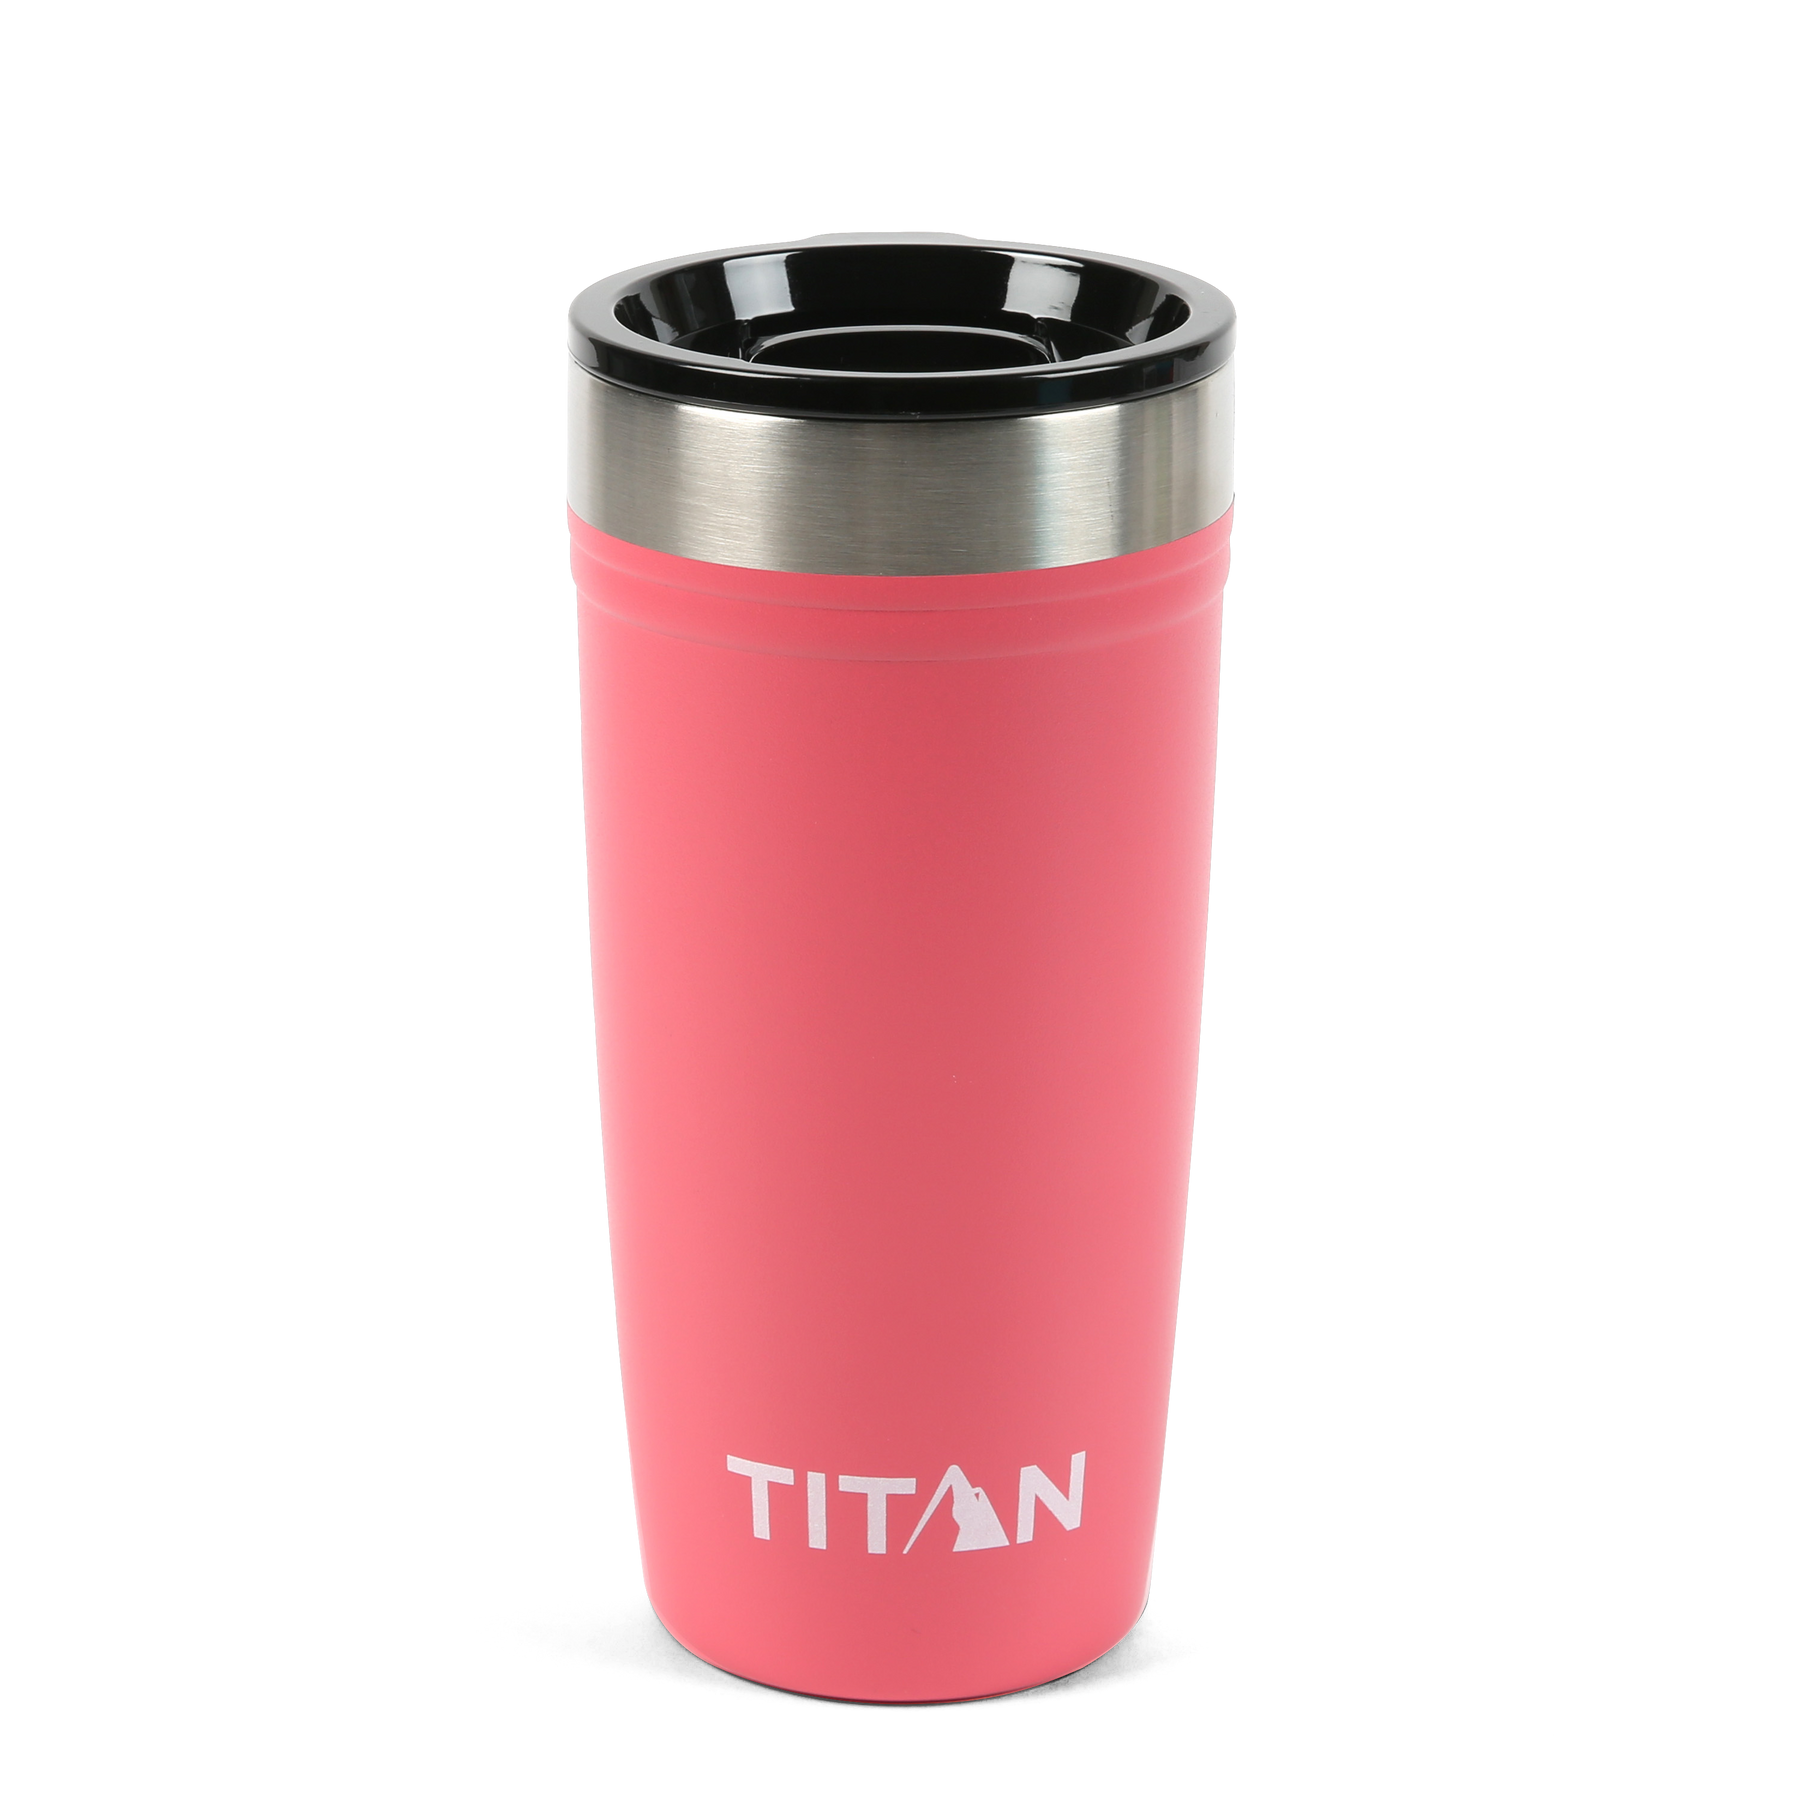  TUMBLER Protective Stand - Companion Holder for The